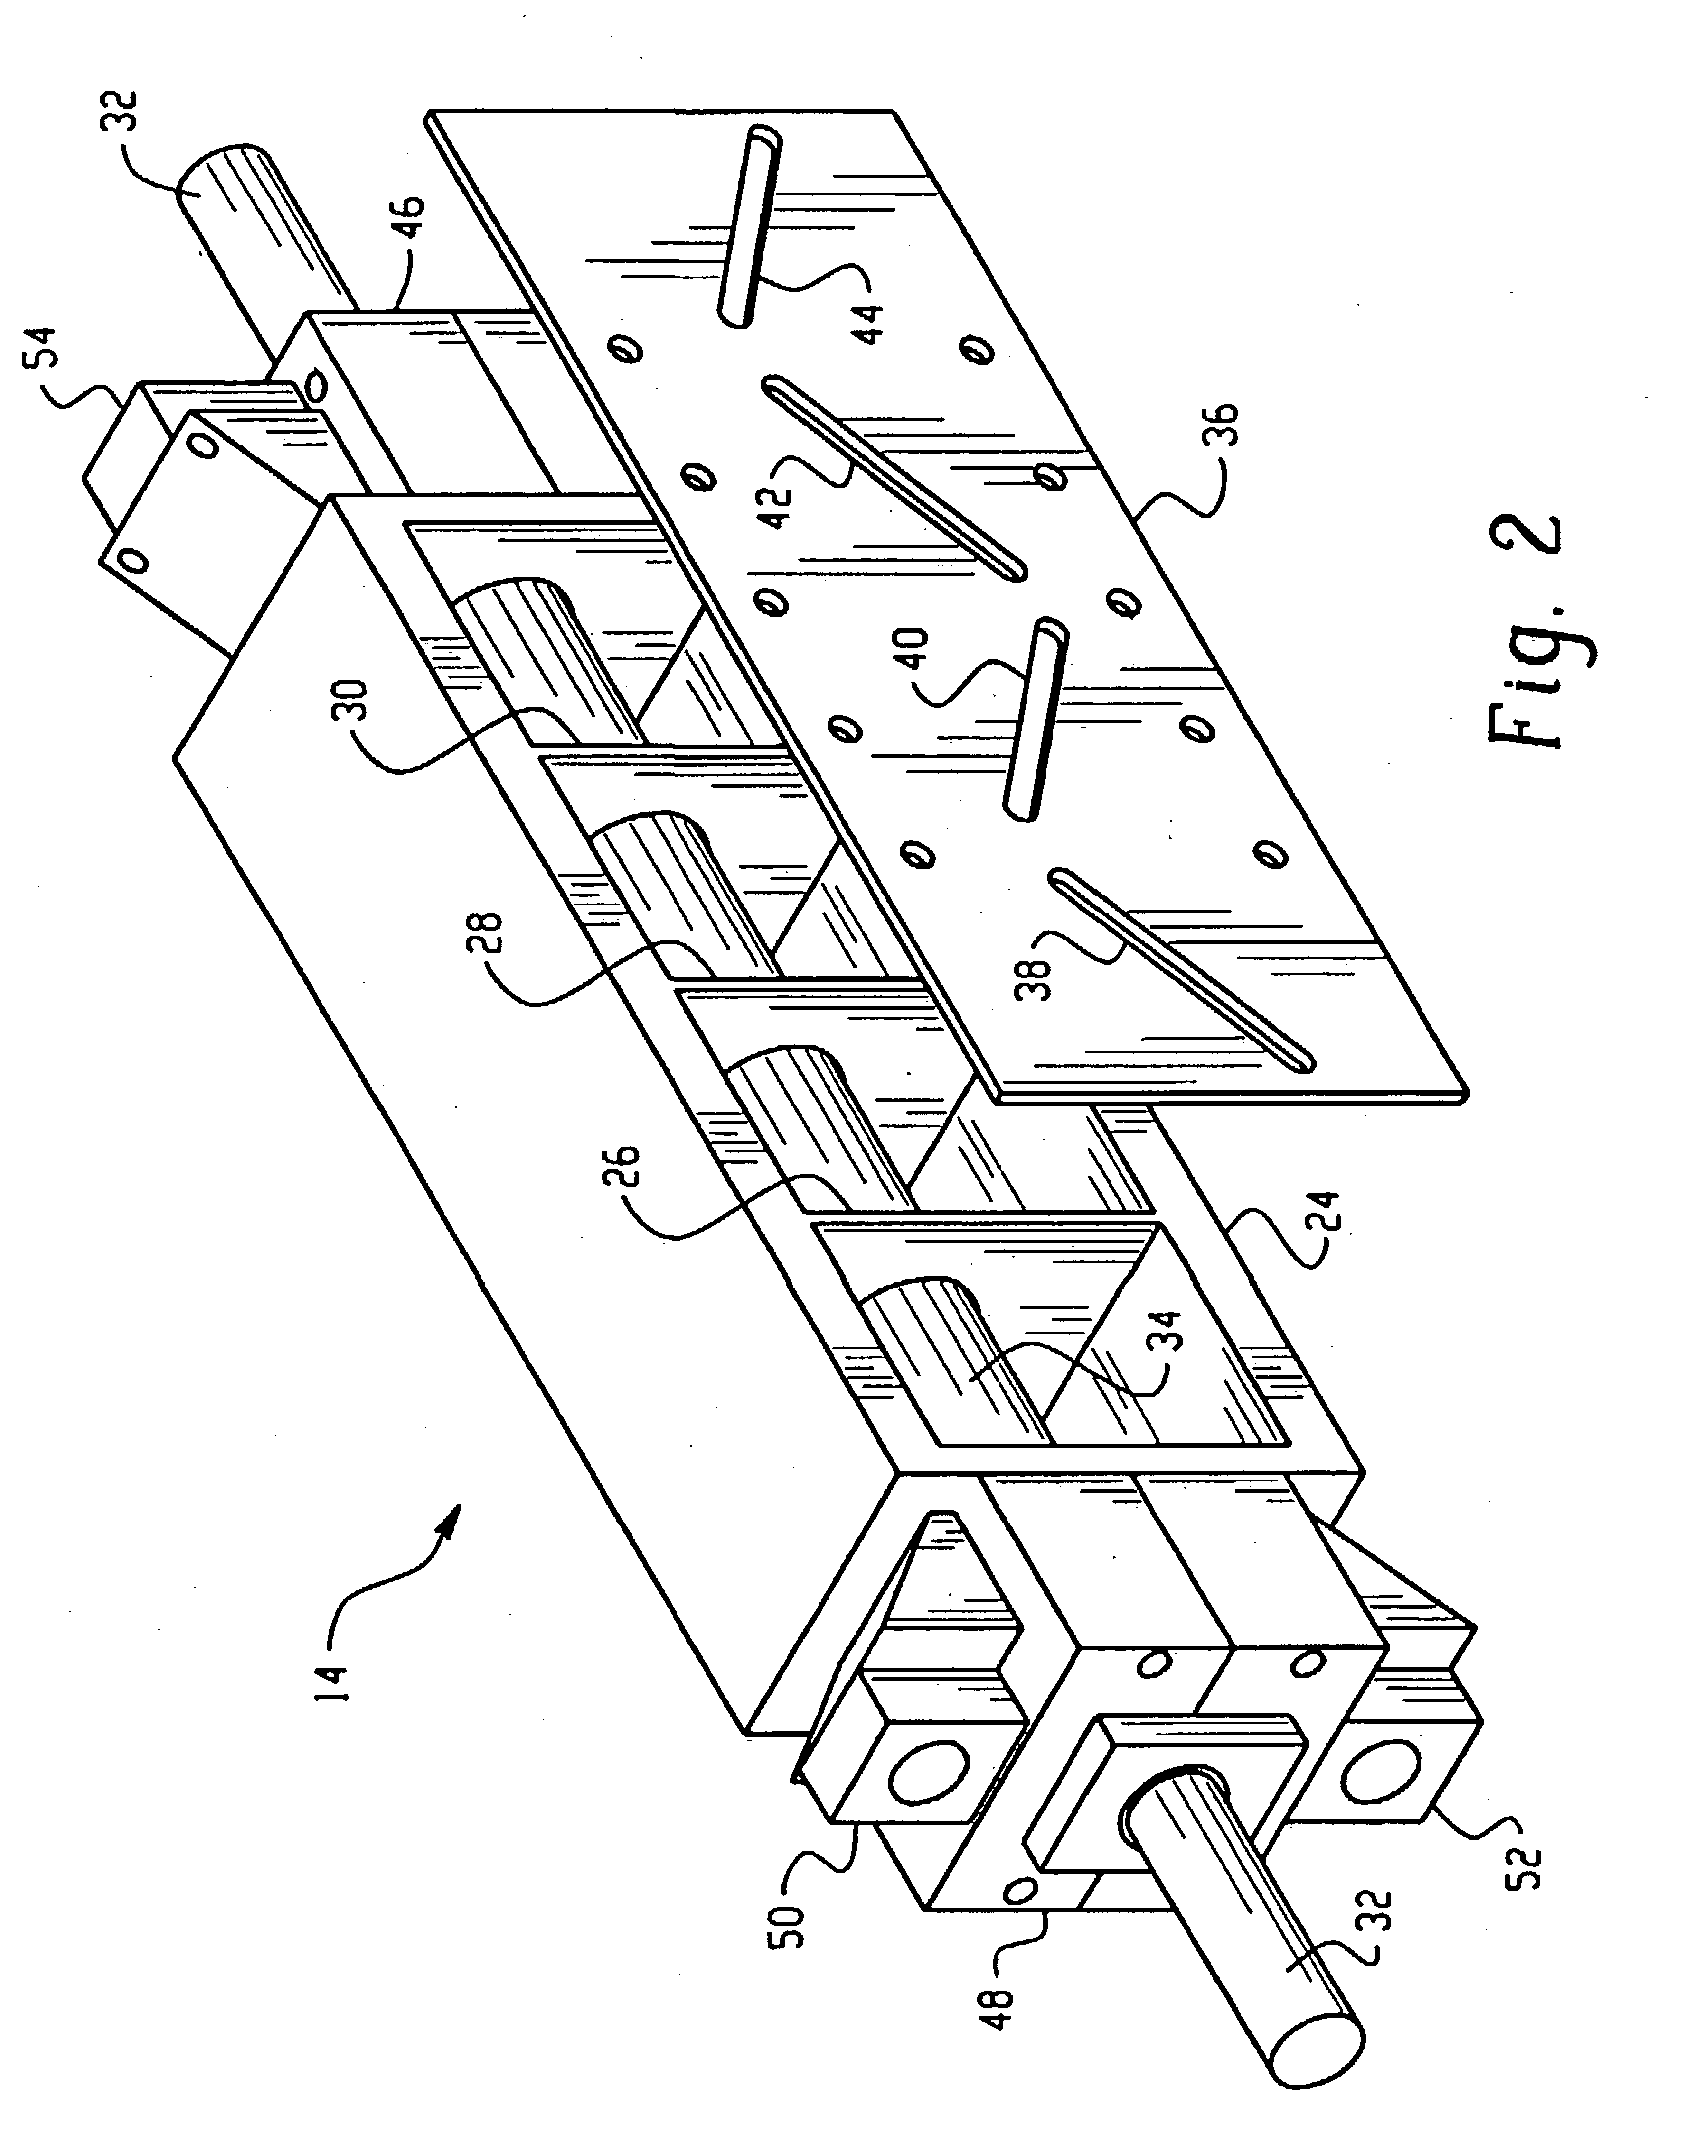 Plasma ashing apparatus and endpoint detection process